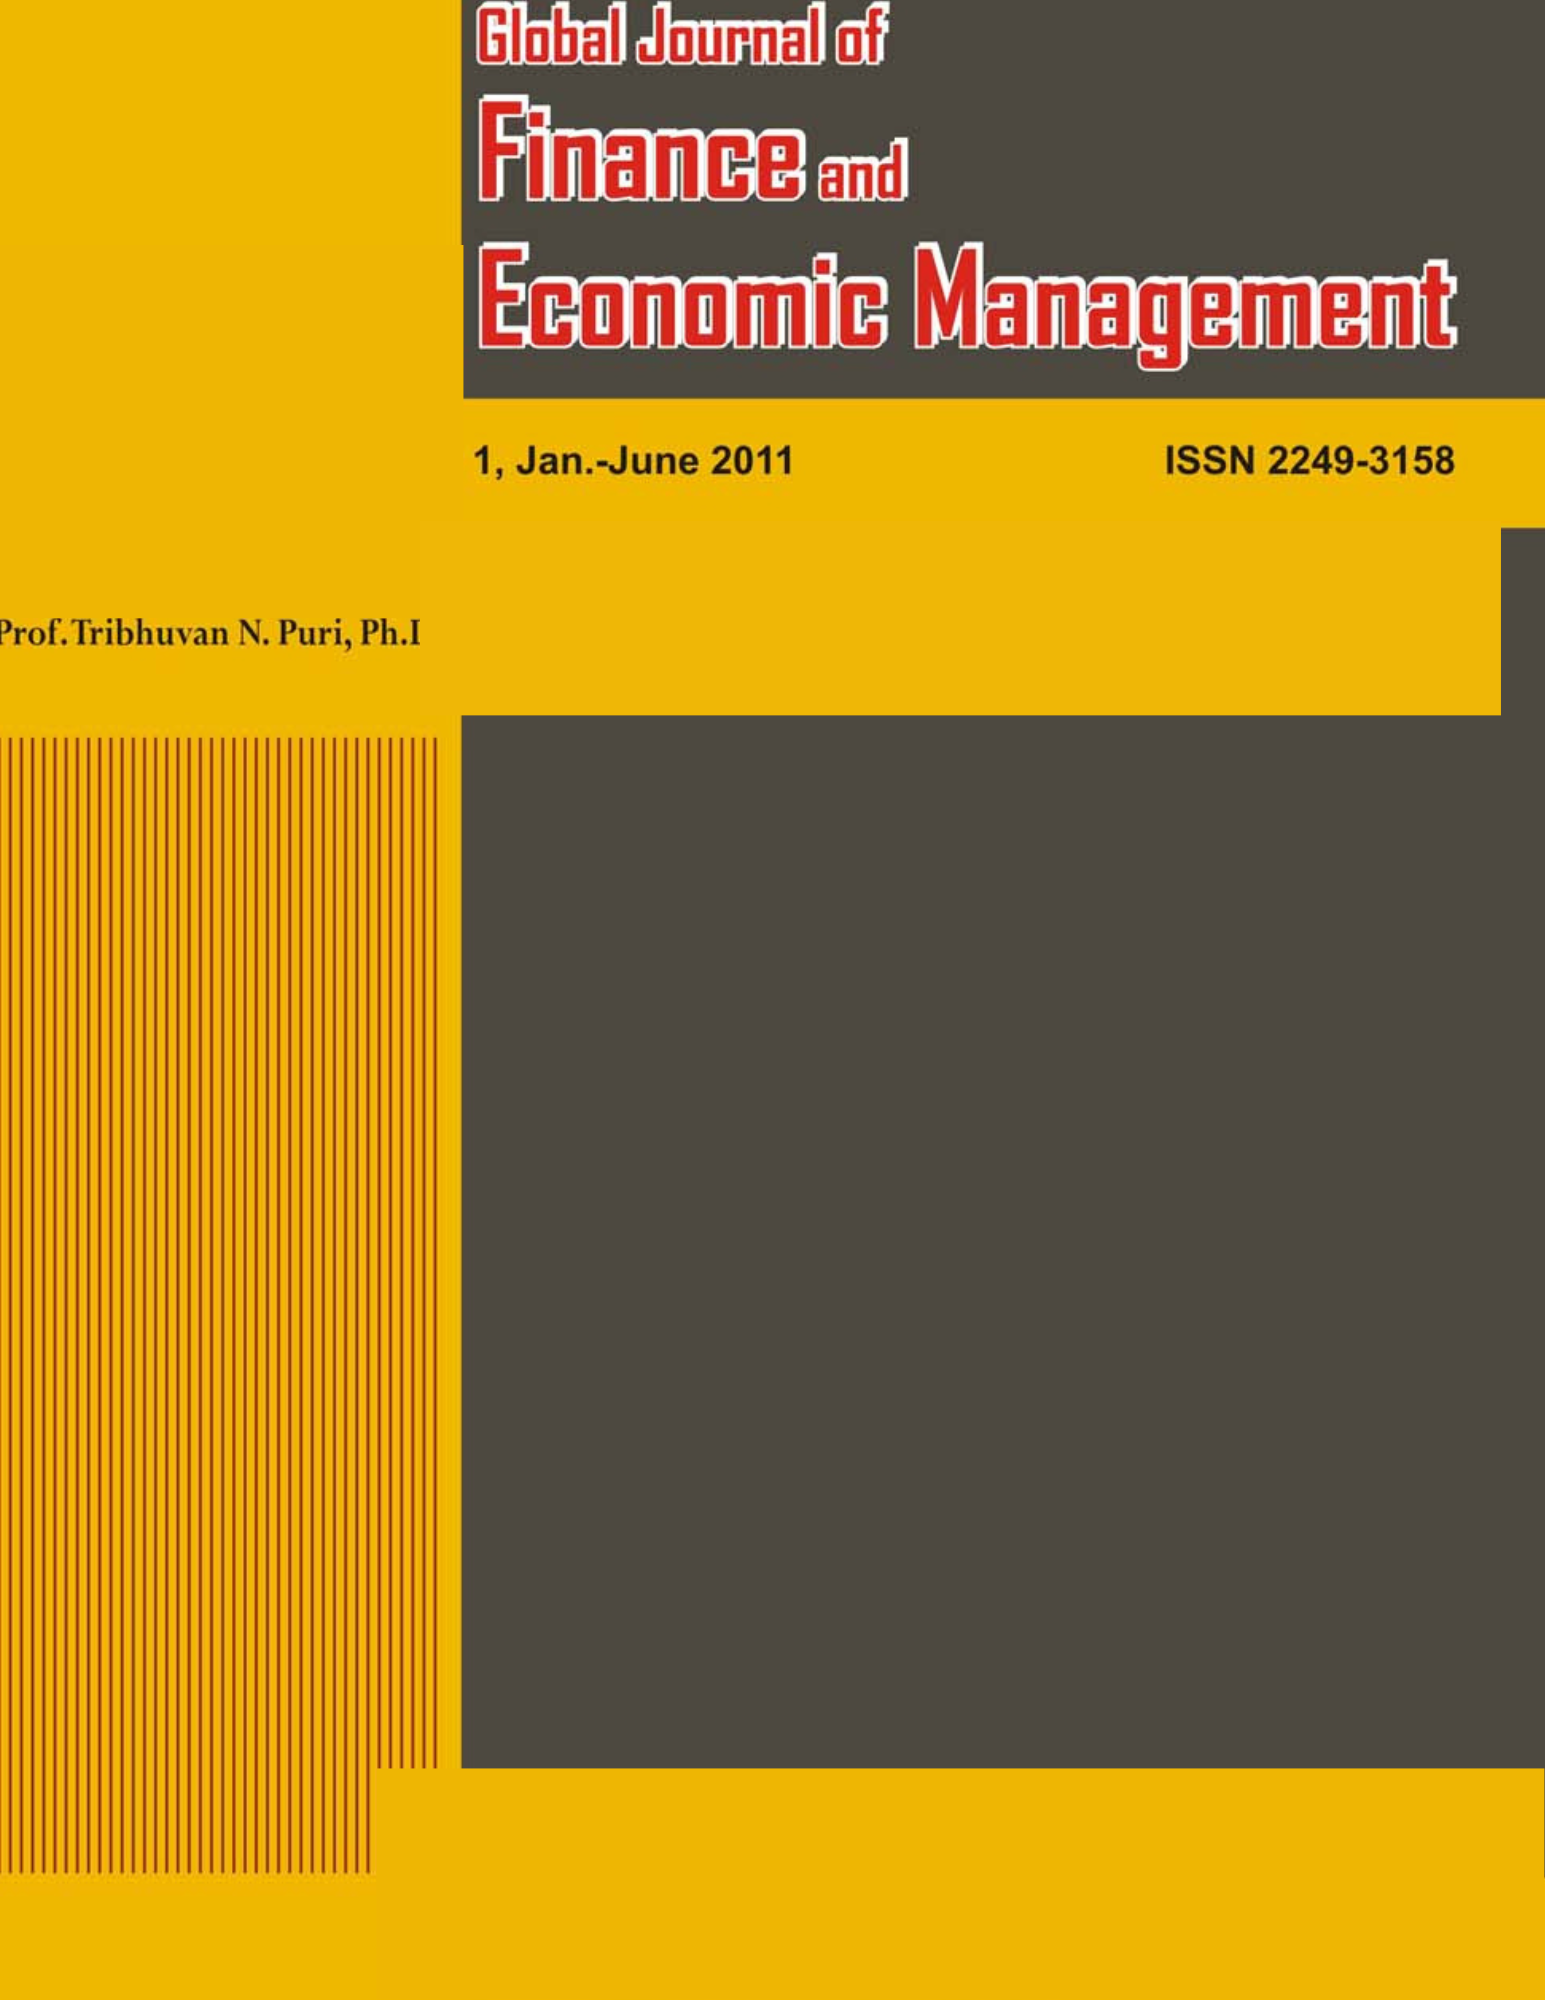 Global Journal of Finance and Economic Management